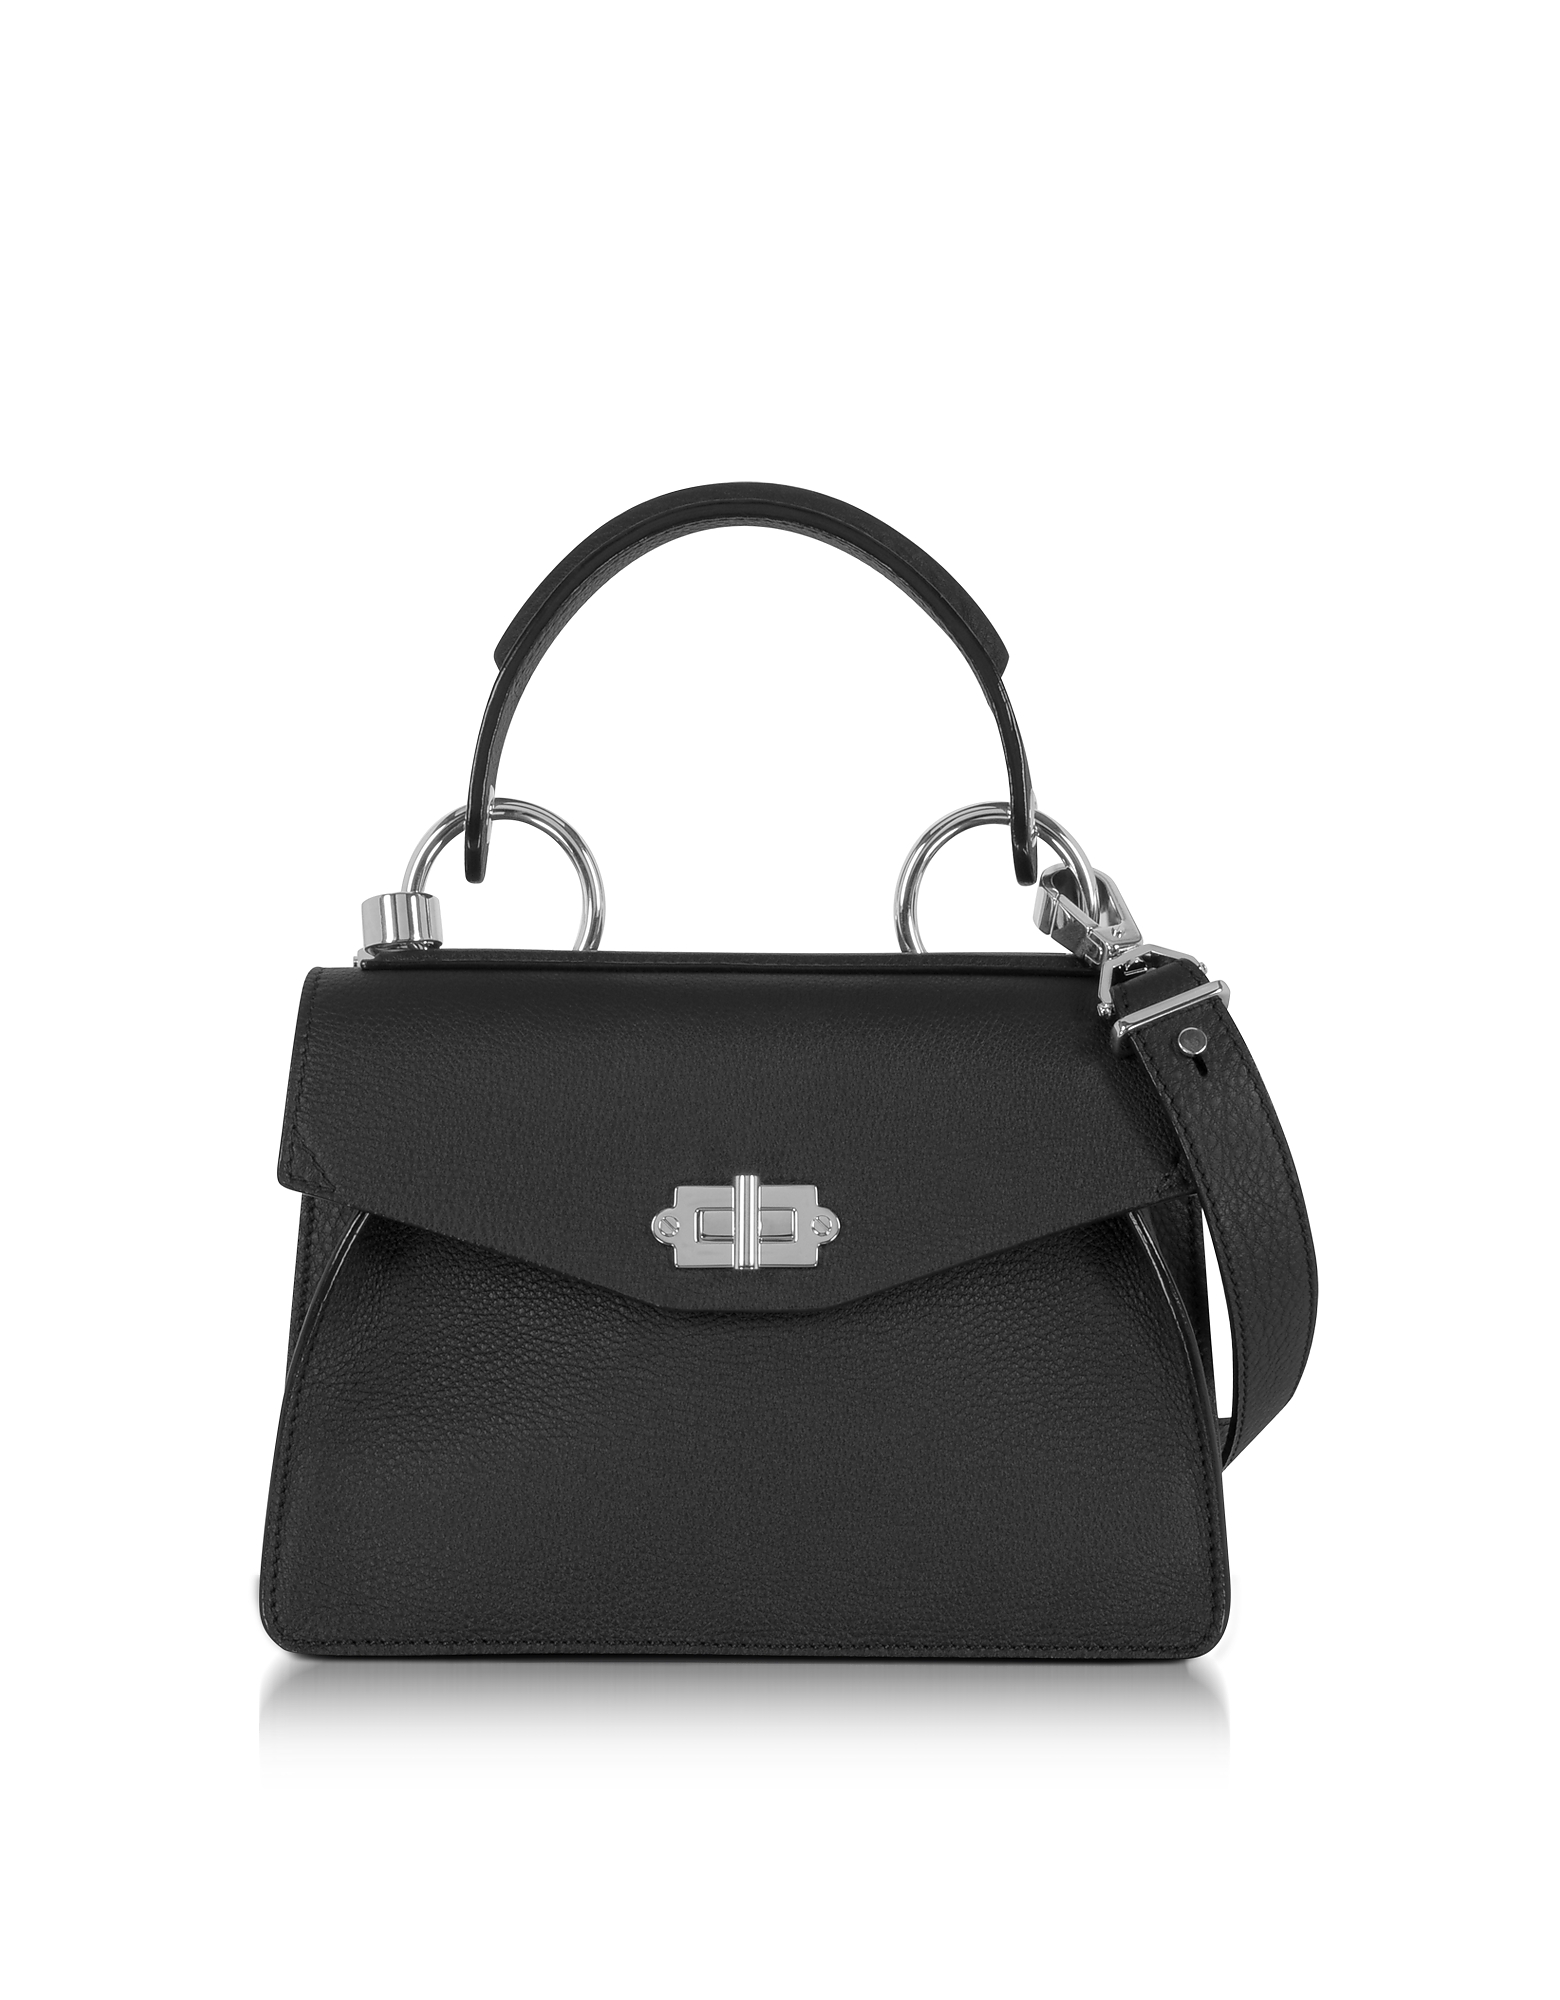 Proenza Schouler - Black Lindos Leather Small Hava Top Handle | ABOUT ICONS